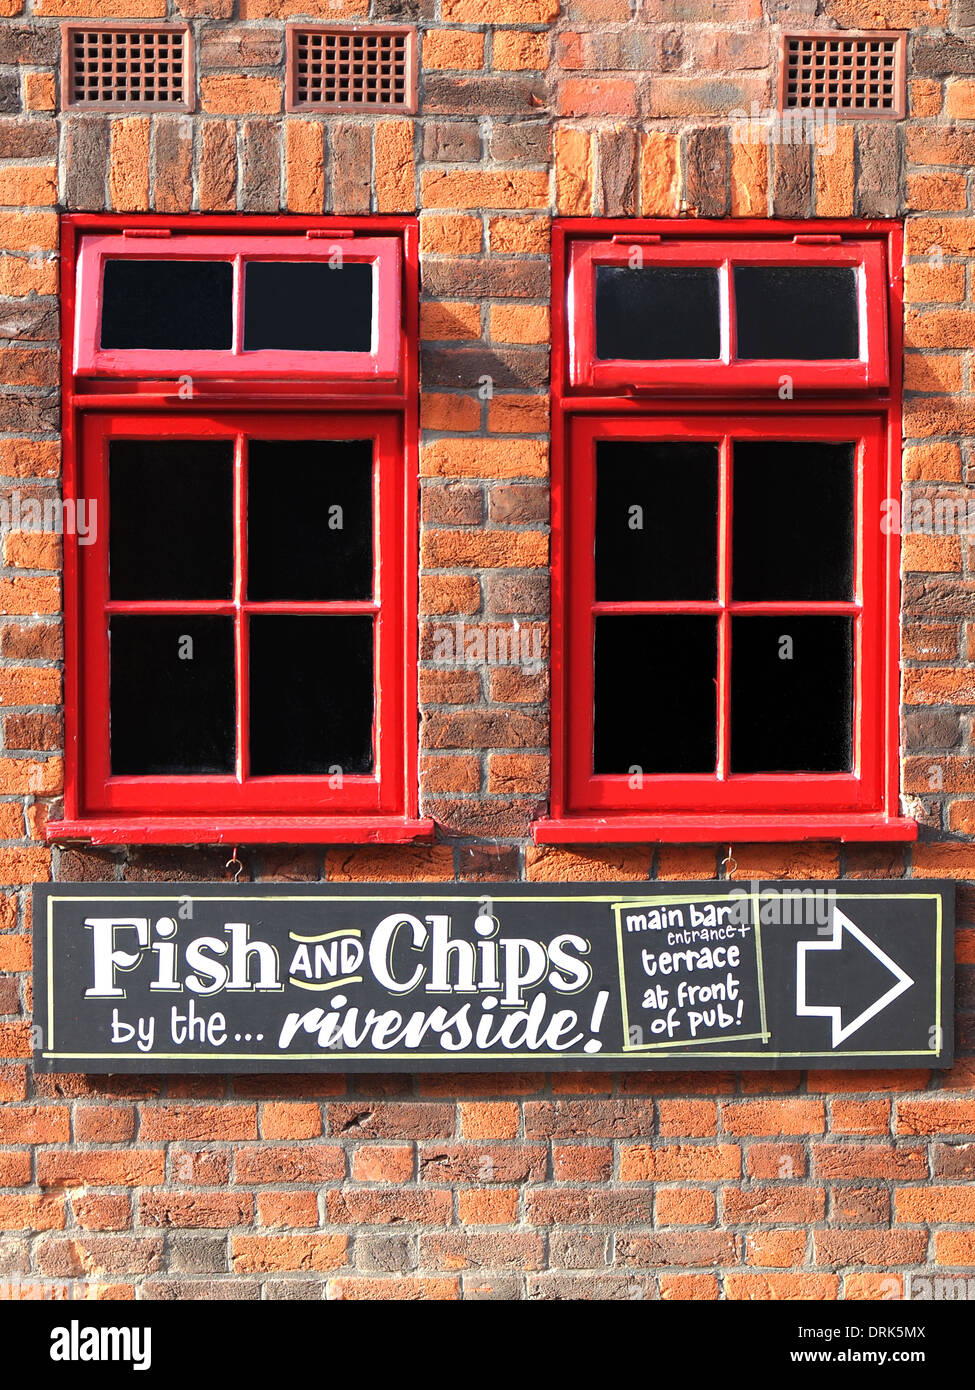 wooden arrow sign with the text Fish and chips on the red brick house Stock Photo